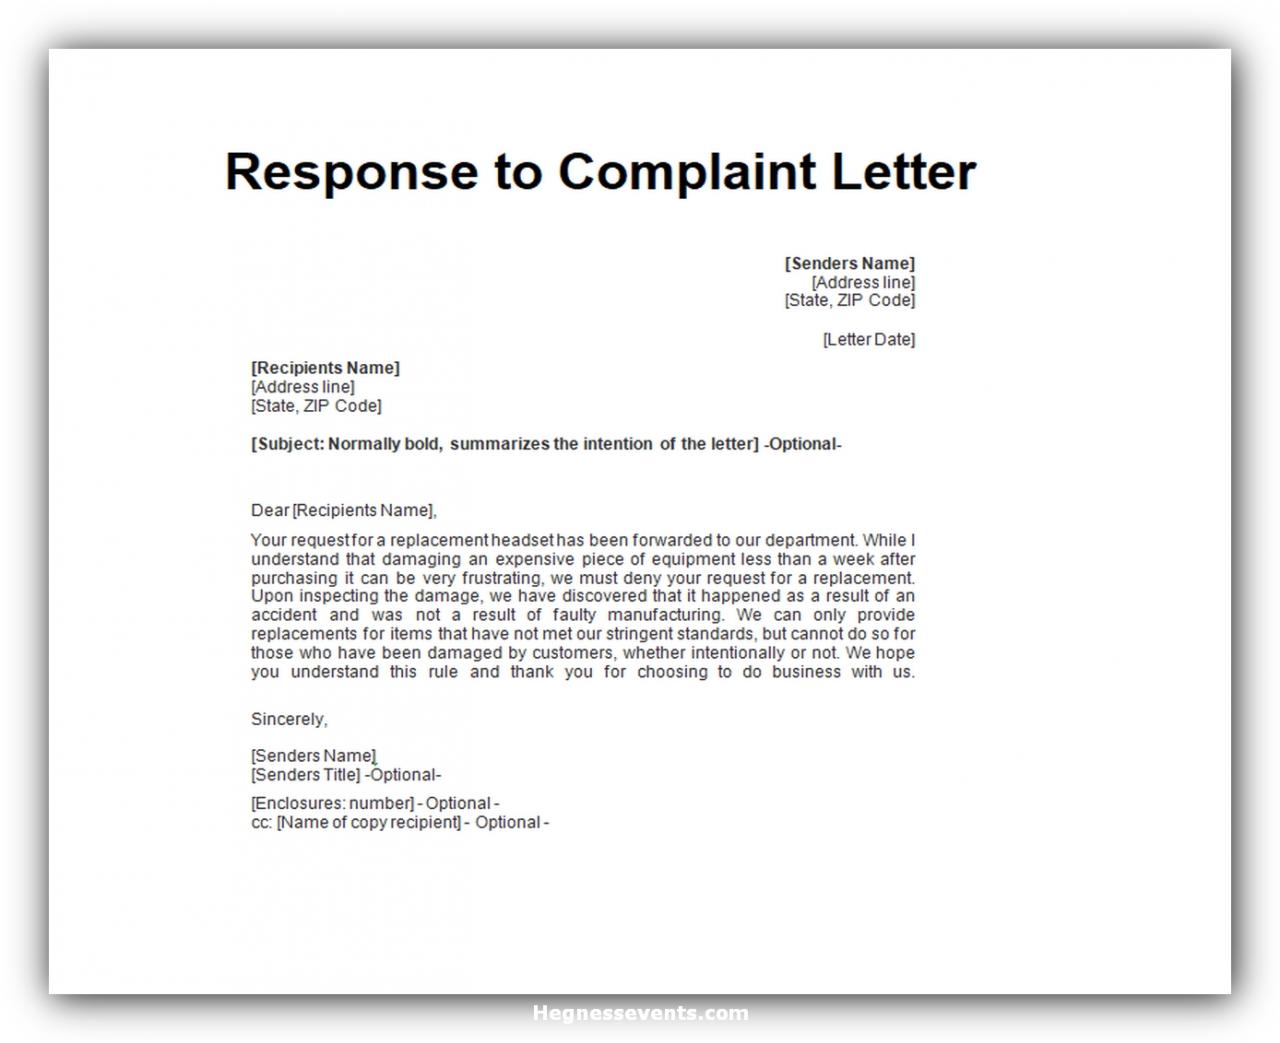 How to write a letter to complaint about an employee